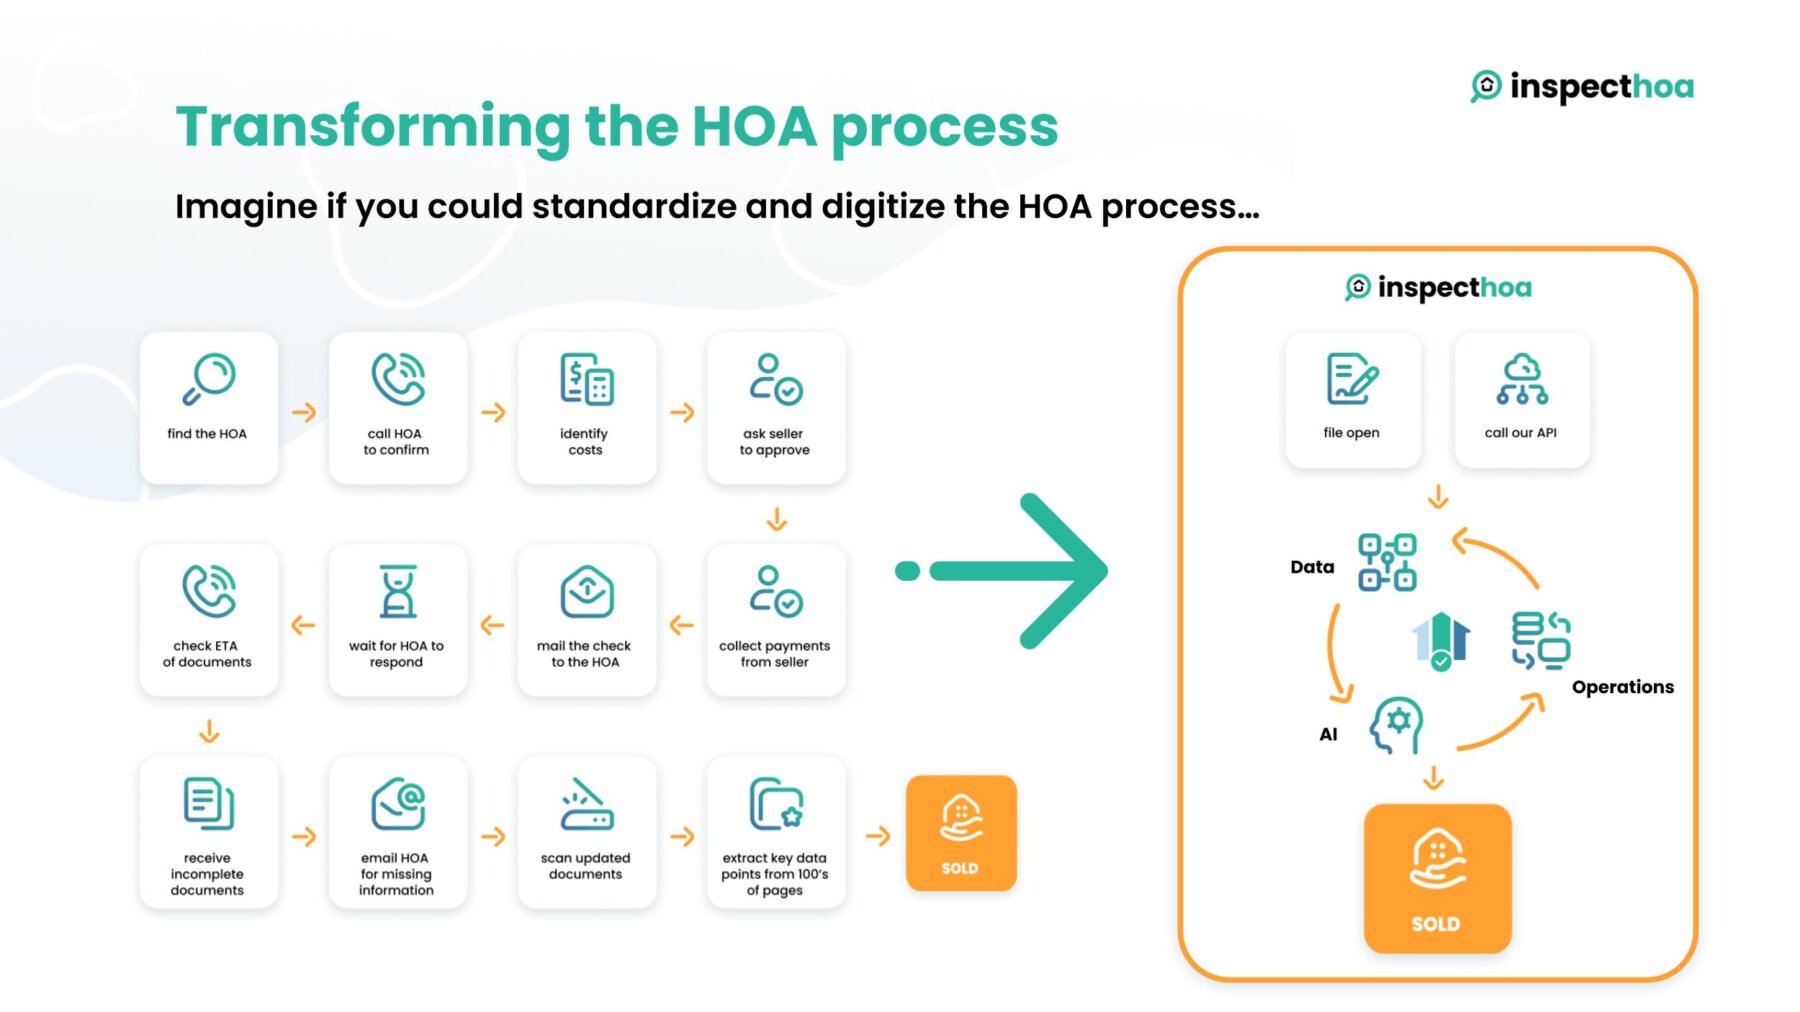 infographic for how inspecthoa improve hoa document for closing acquisition